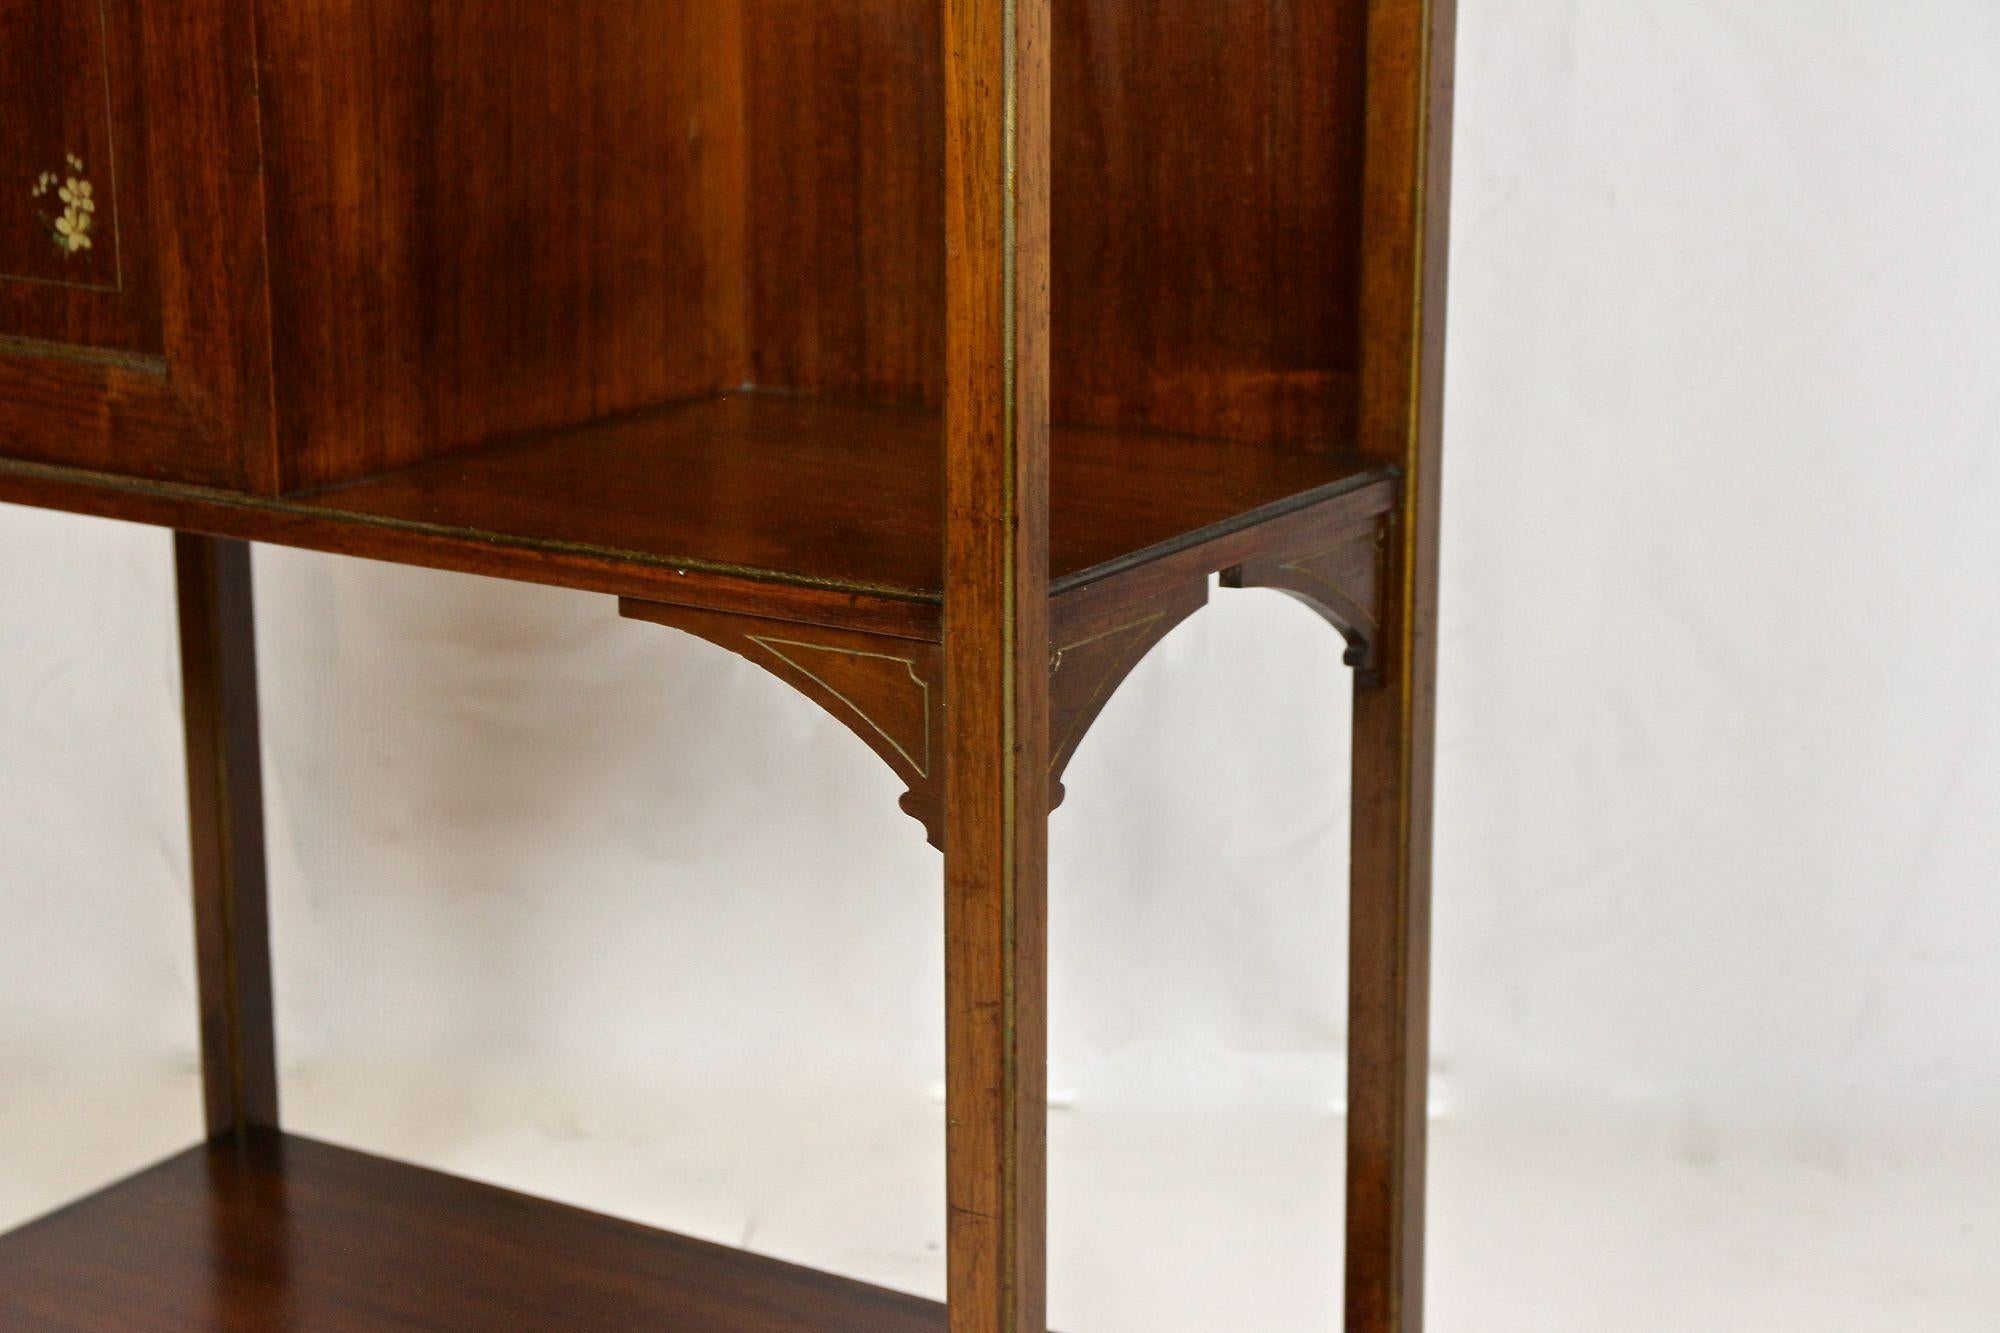 20th Century Art Nouveau Mahogany Display Cabinet/ Etagere With Painted Flowers, FR ca. 1900